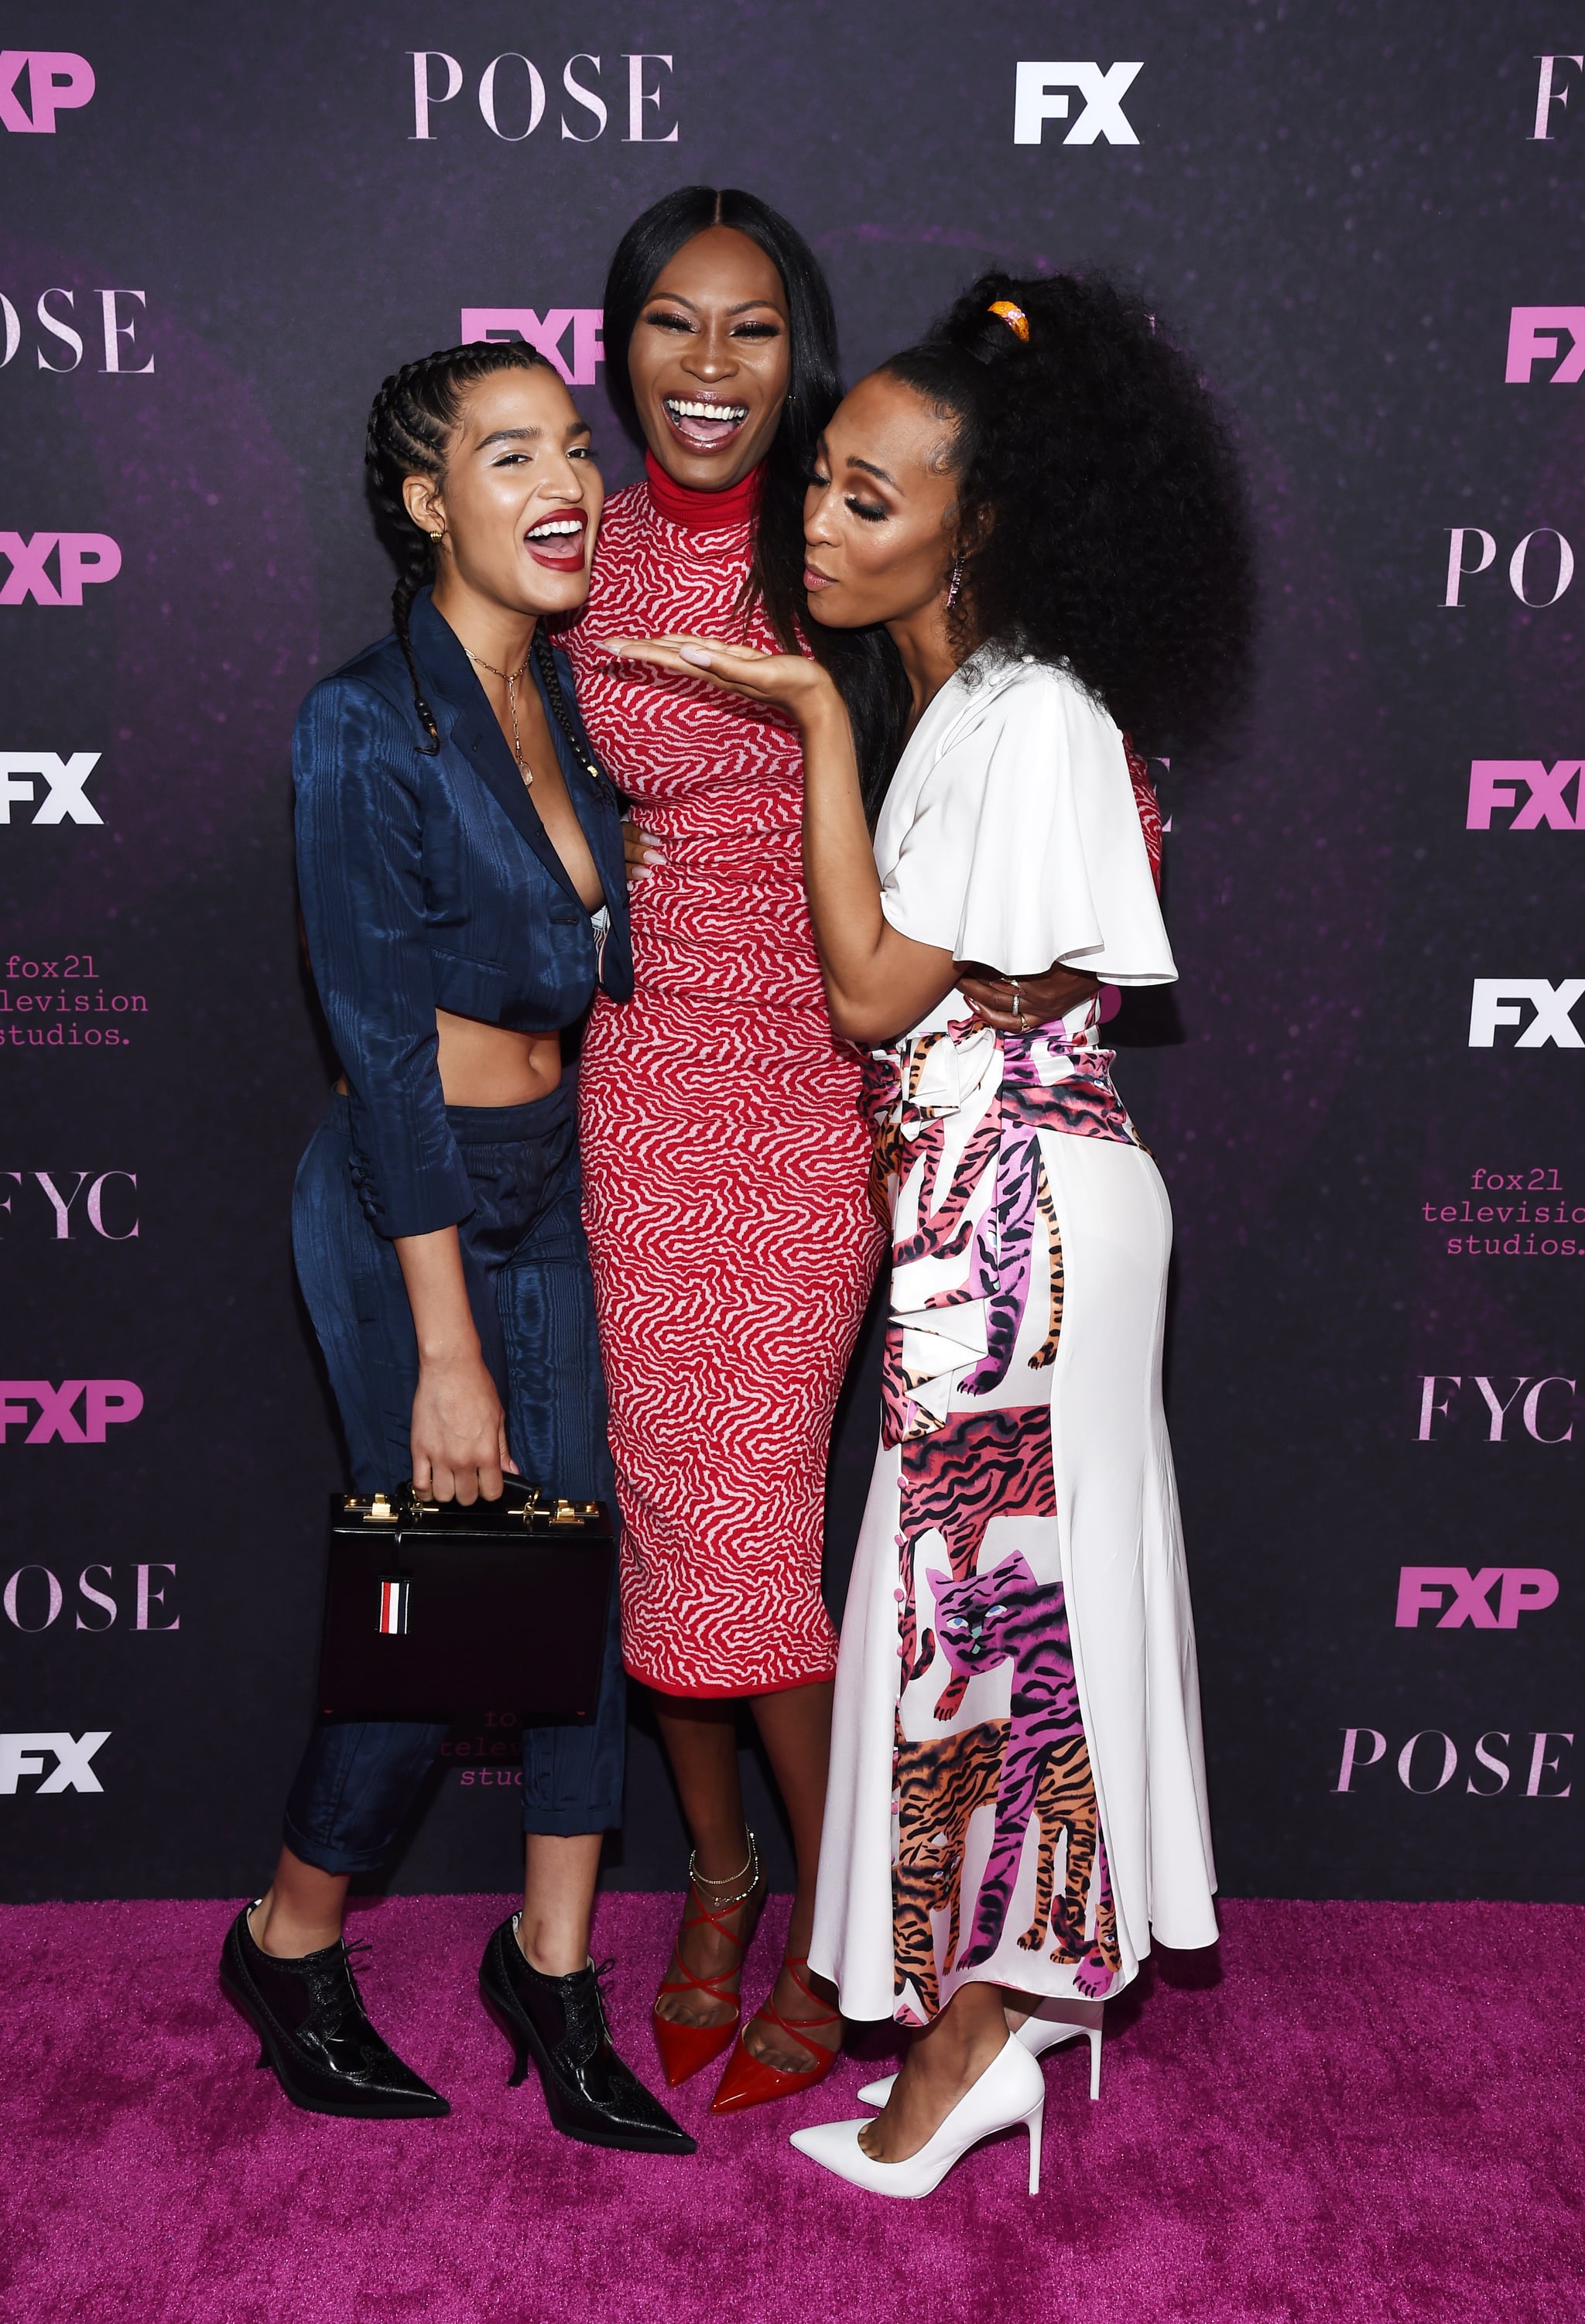 HOLLYWOOD, CALIFORNIA - JUNE 01: (L-R) Indya Moore, Dominique Jackson and Mj Rodriguez attend the FYC Event for FX'x